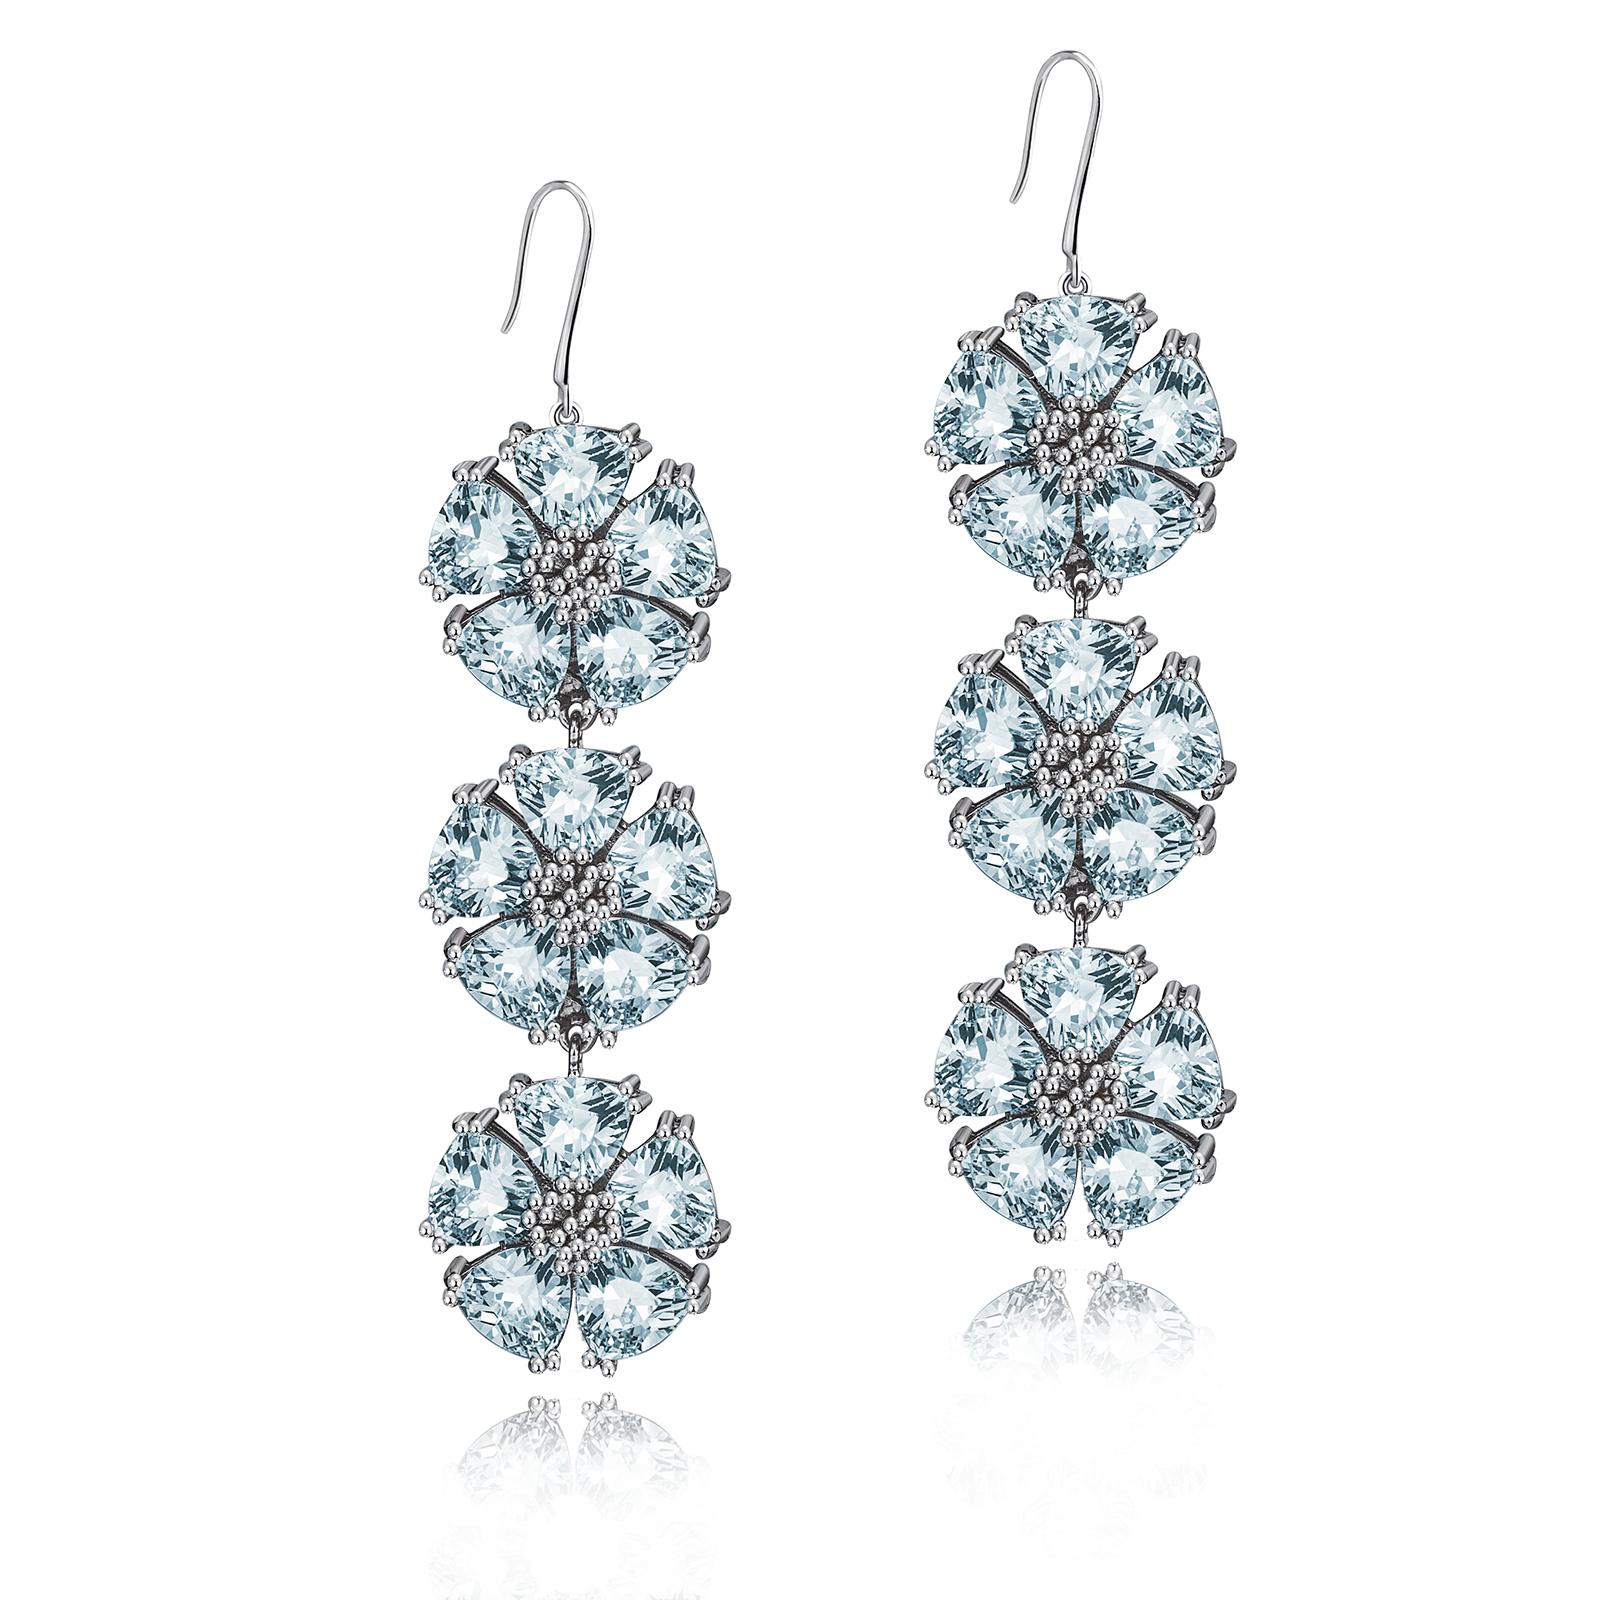 Designed in NYC

.925 Sterling Silver 30 x 7 mm Dark Blue Topaz Triple Blossom Stone Bling Earrings. No matter the season, allow natural beauty to surround you wherever you go. Triple blossom stone bling earrings: 

Sterling silver 
High-polish